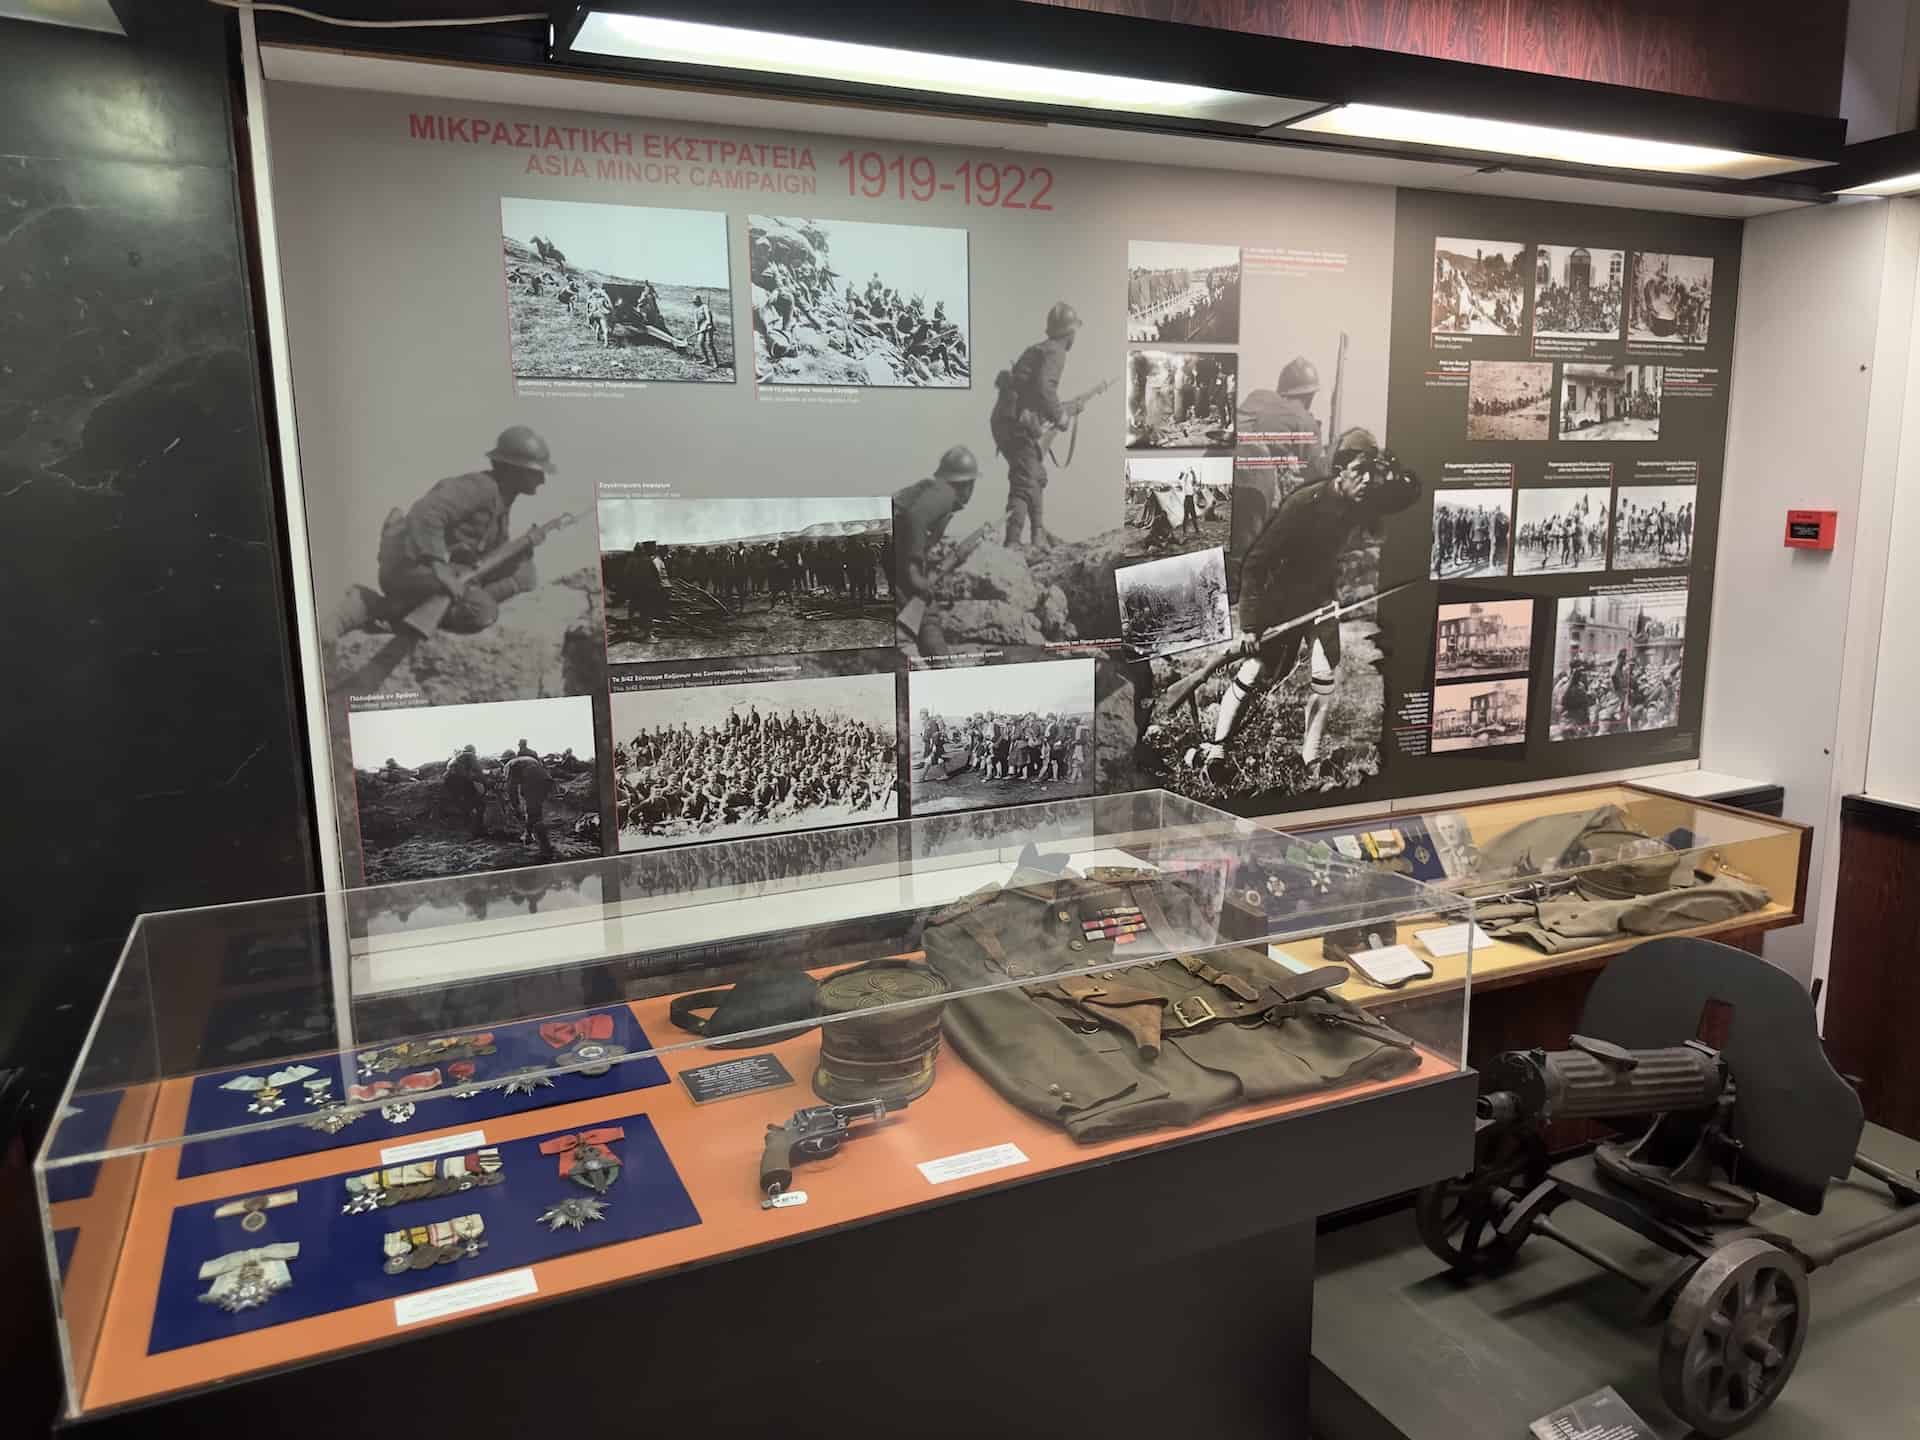 Asia Minor Campaign, 1919-1922 at the War Museum in Athens, Greece